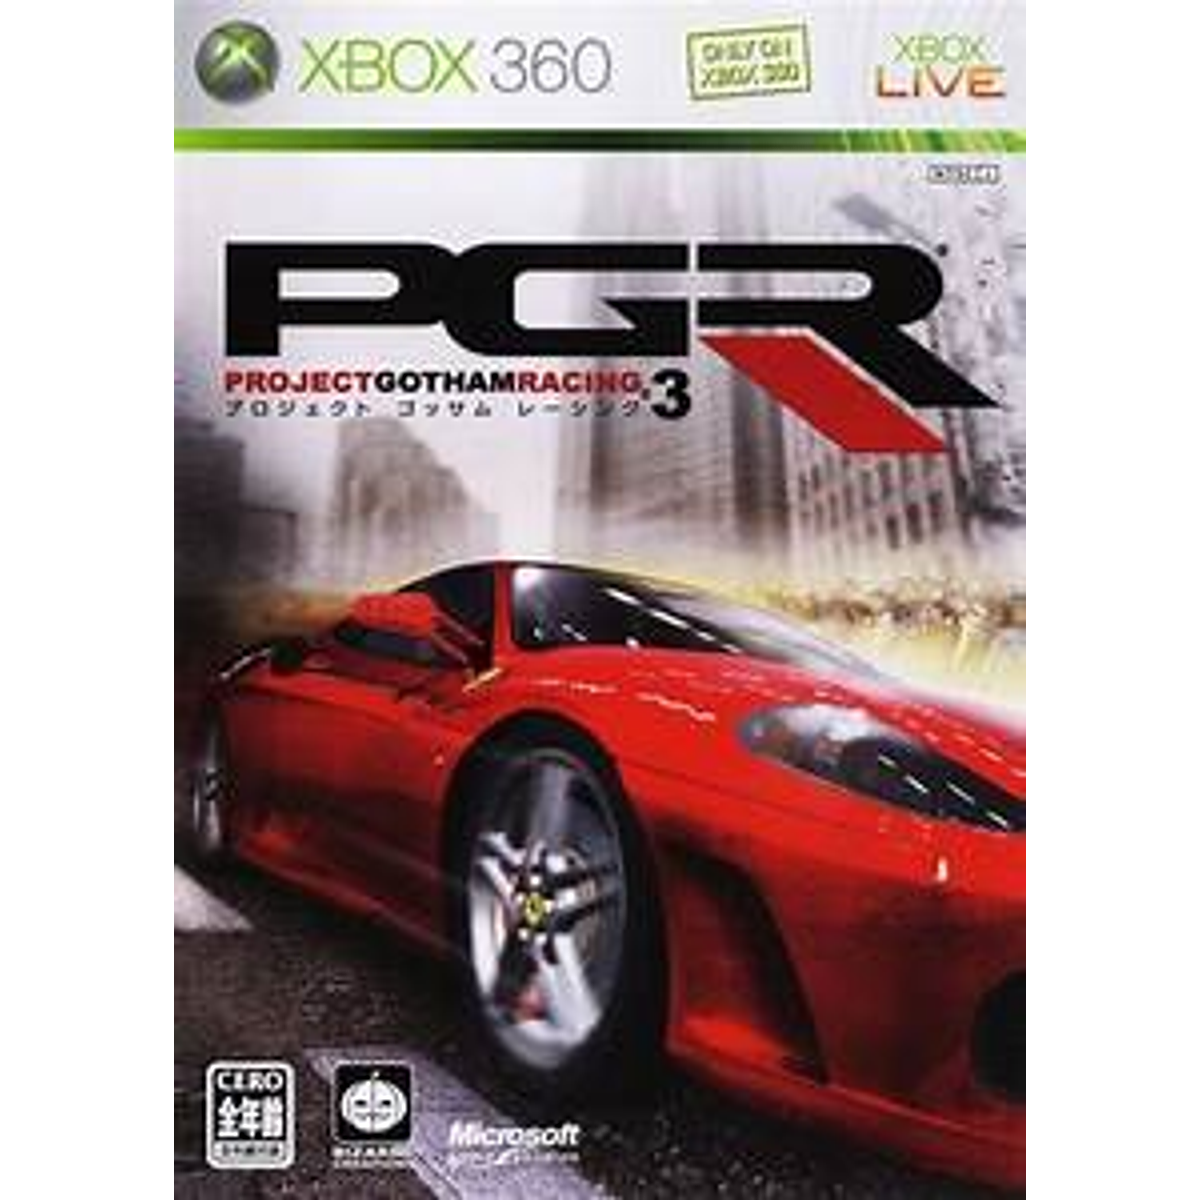 XBOX 360 PGR Project Gotham Racing 3